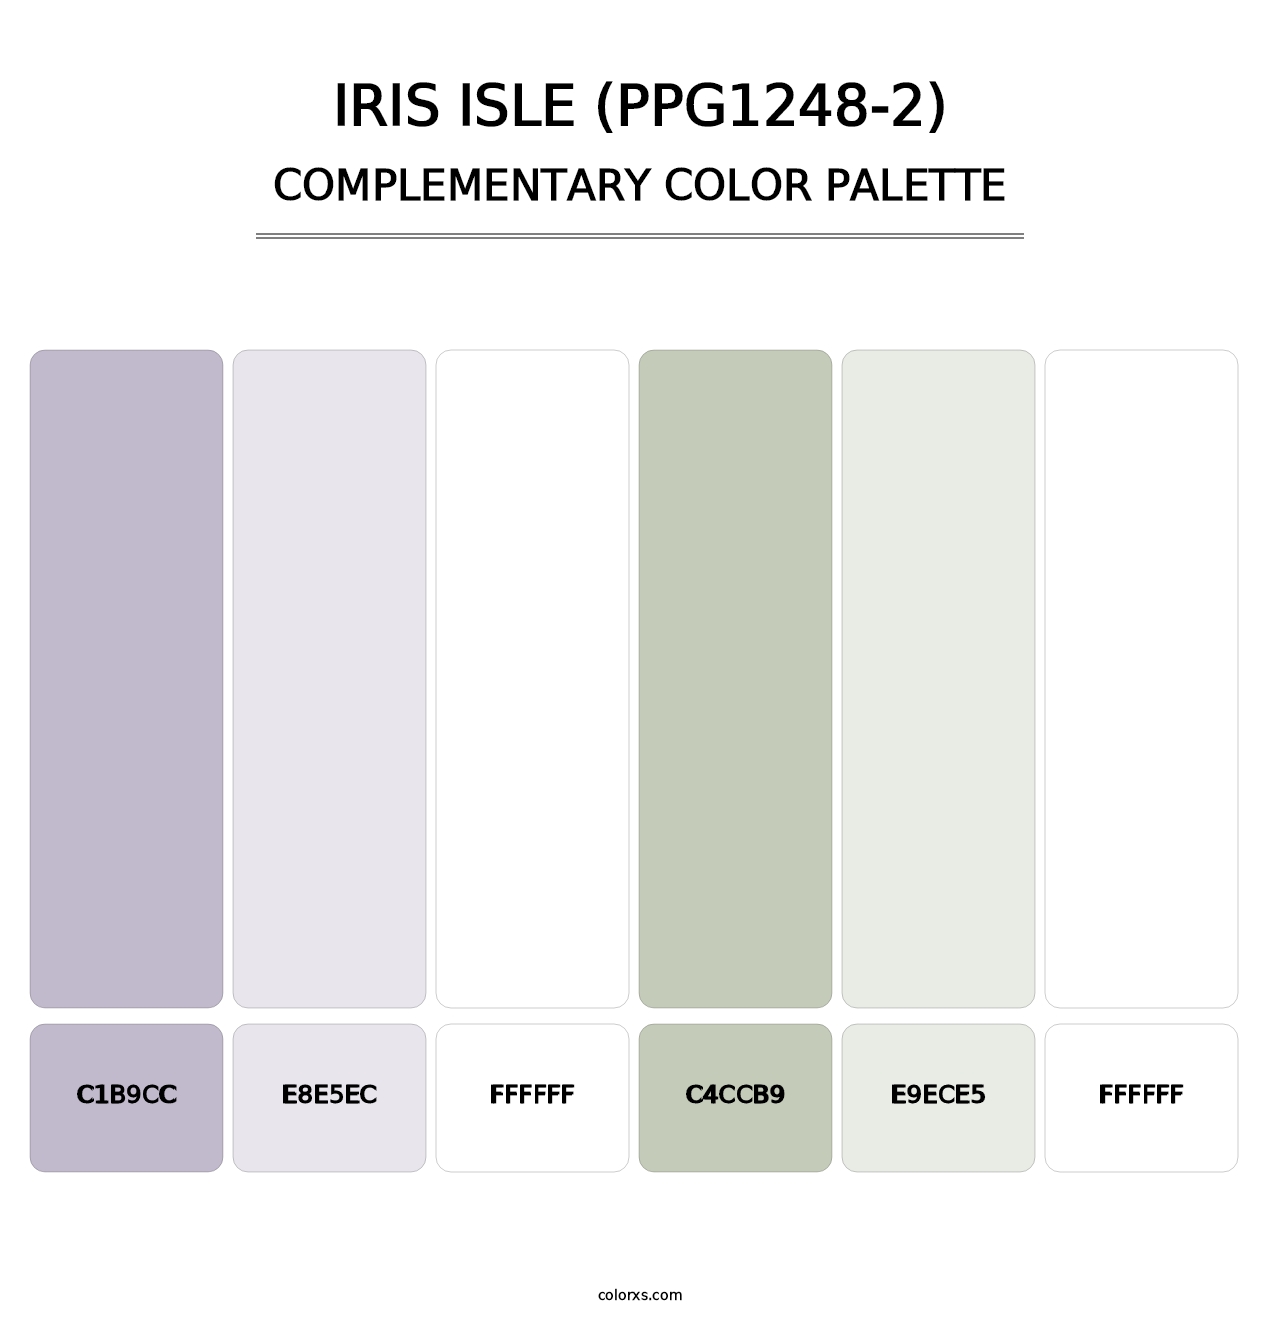 Iris Isle (PPG1248-2) - Complementary Color Palette